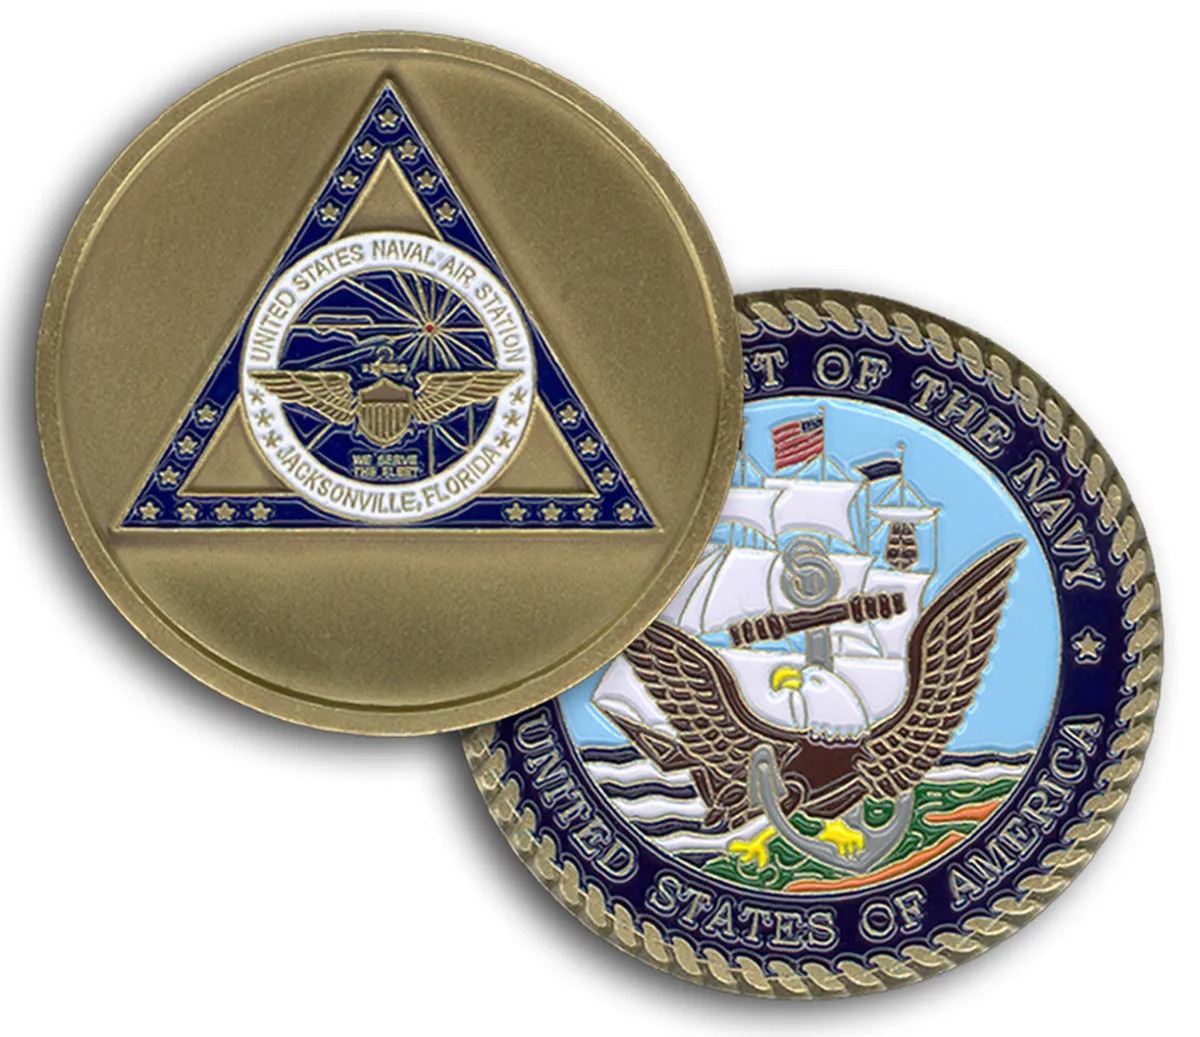 nas jacksonville, navy challenge coins, military challenge coins, custom challenge coins, coins customized,